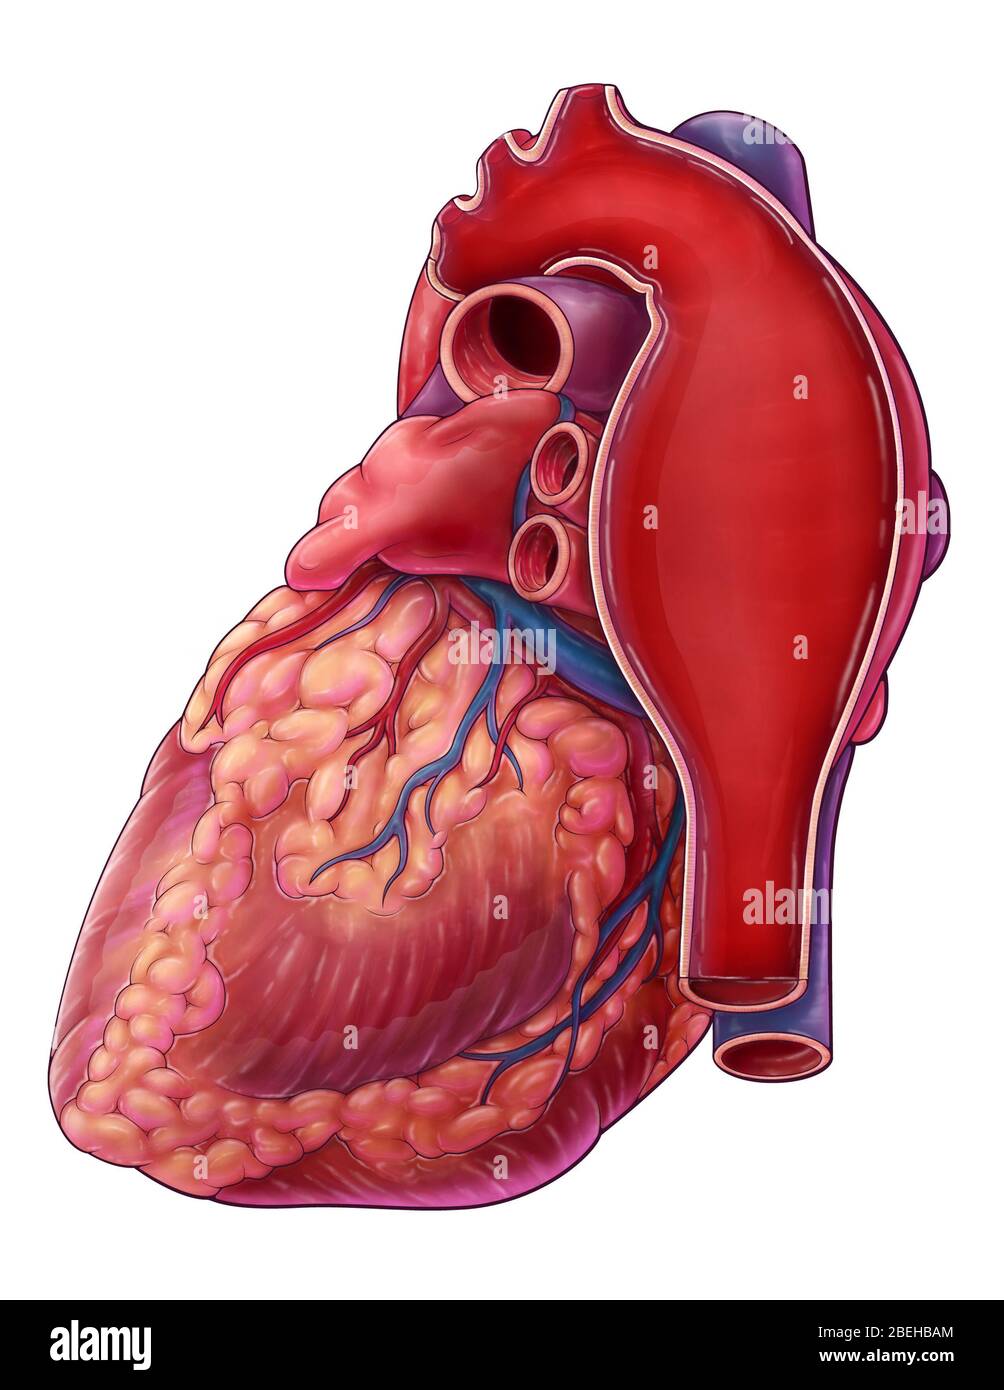 Thoracic Aortic Aneurysm, Illustration Stock Photo